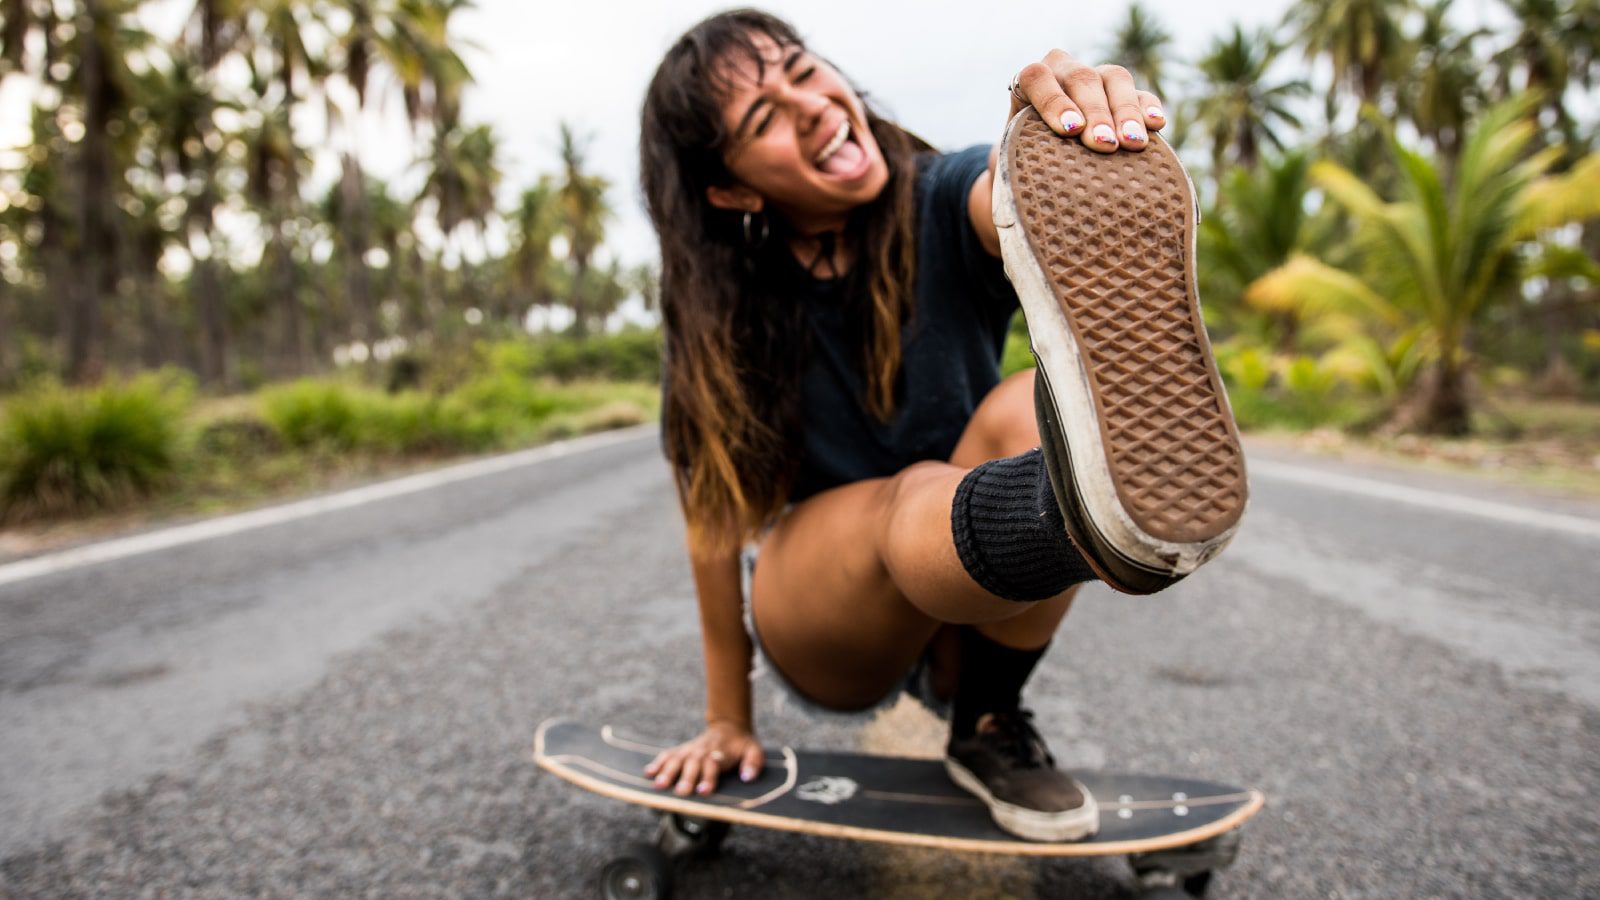 happy young woman on a skateboard.